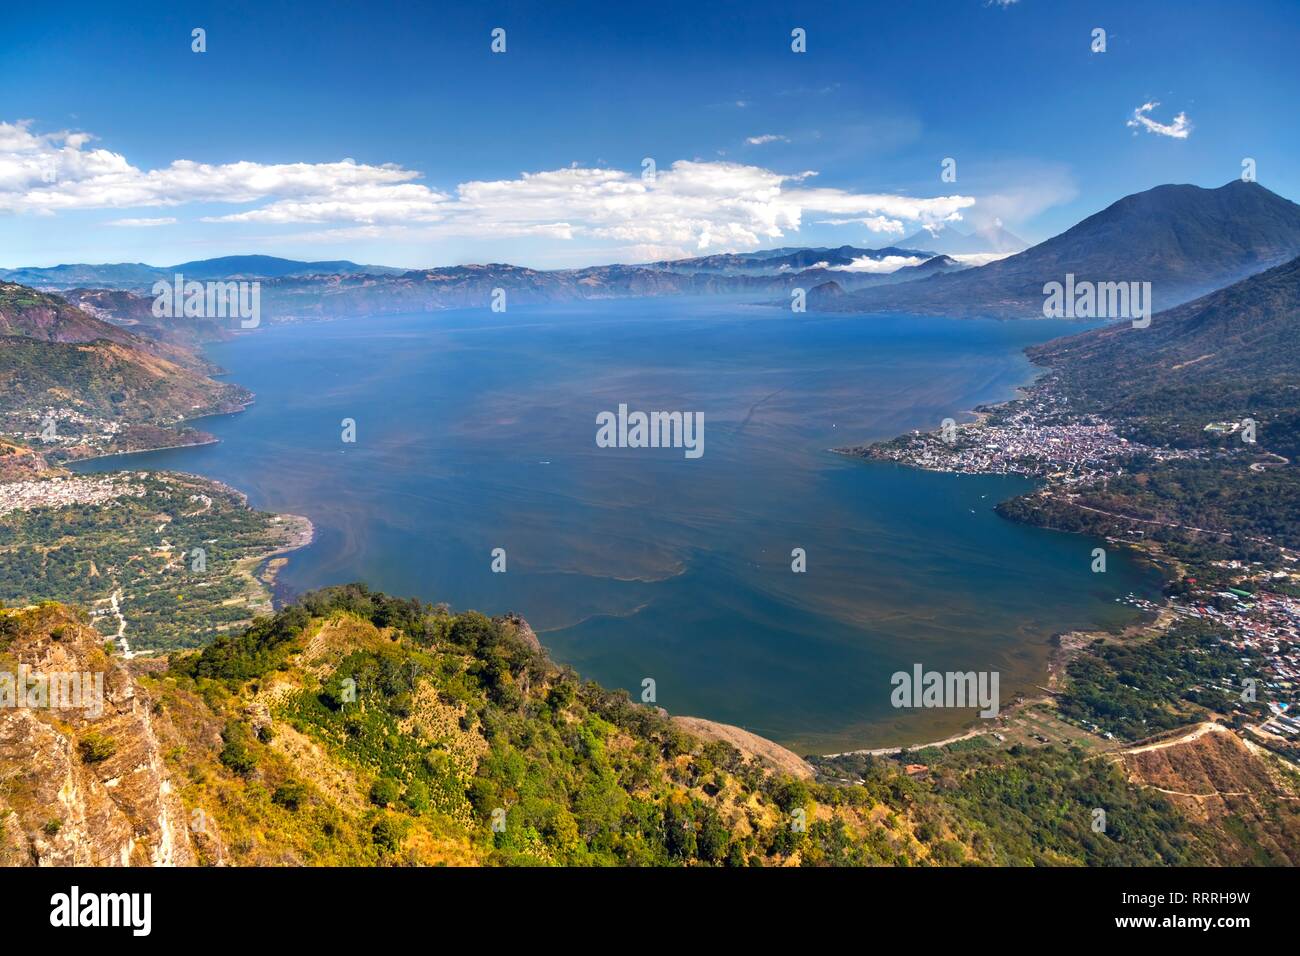 Aerial Landscape View of Blue Lake Atitlan surrounded by volcanoes in Guatemala Highlands with distant Panajachel and San Pedro Villages on Horizon Stock Photo